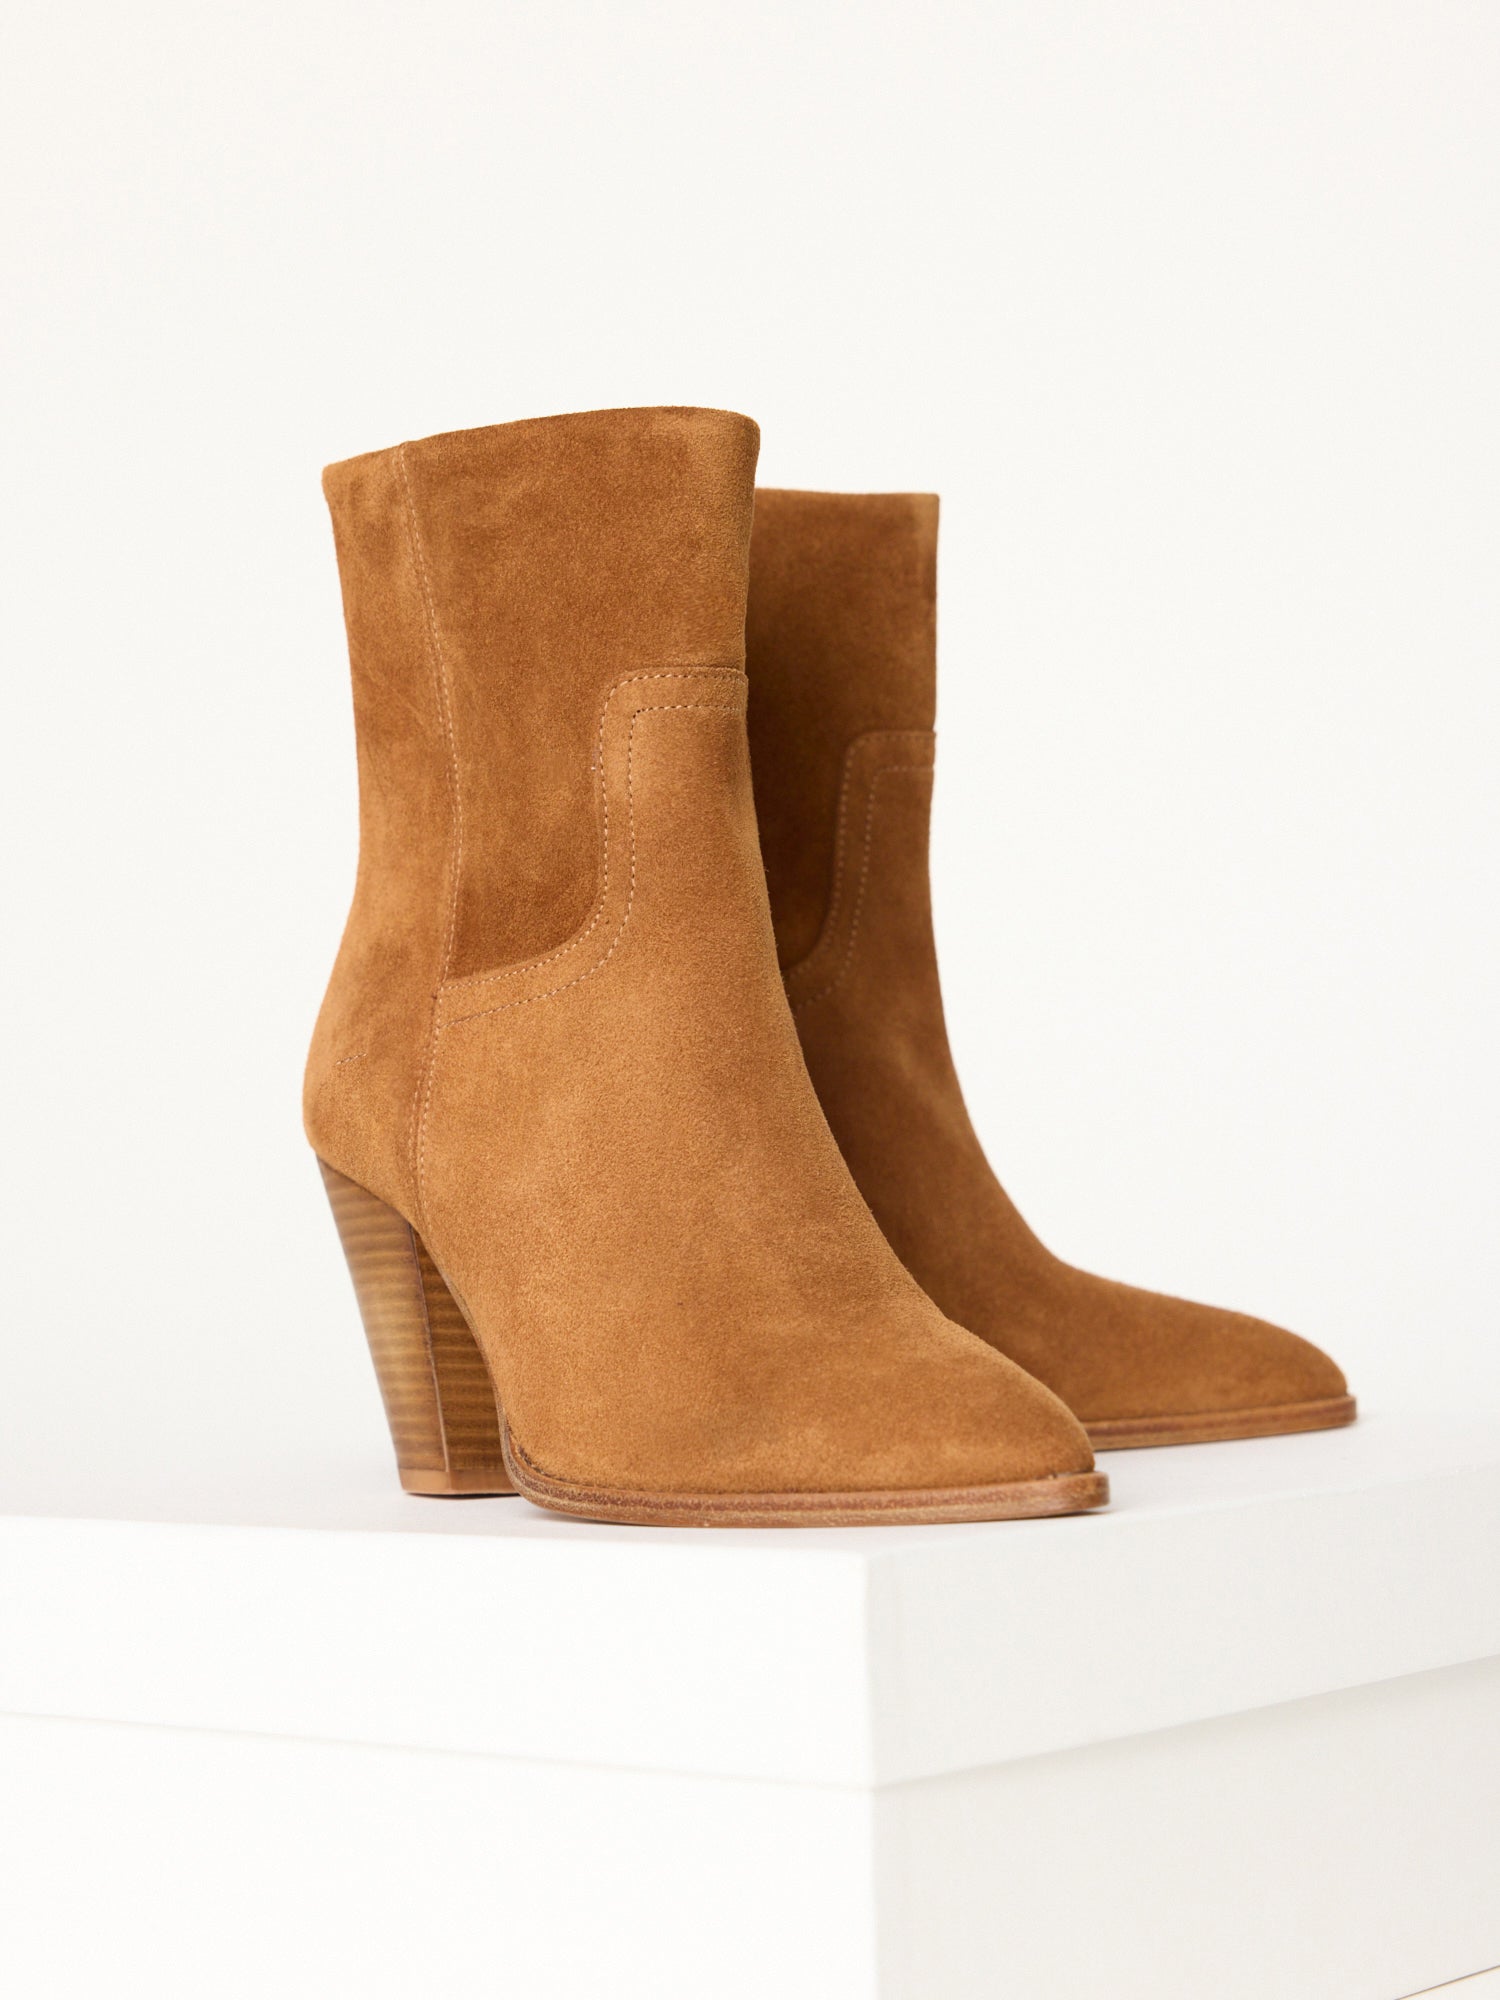 Marfa light brown suded boot side view